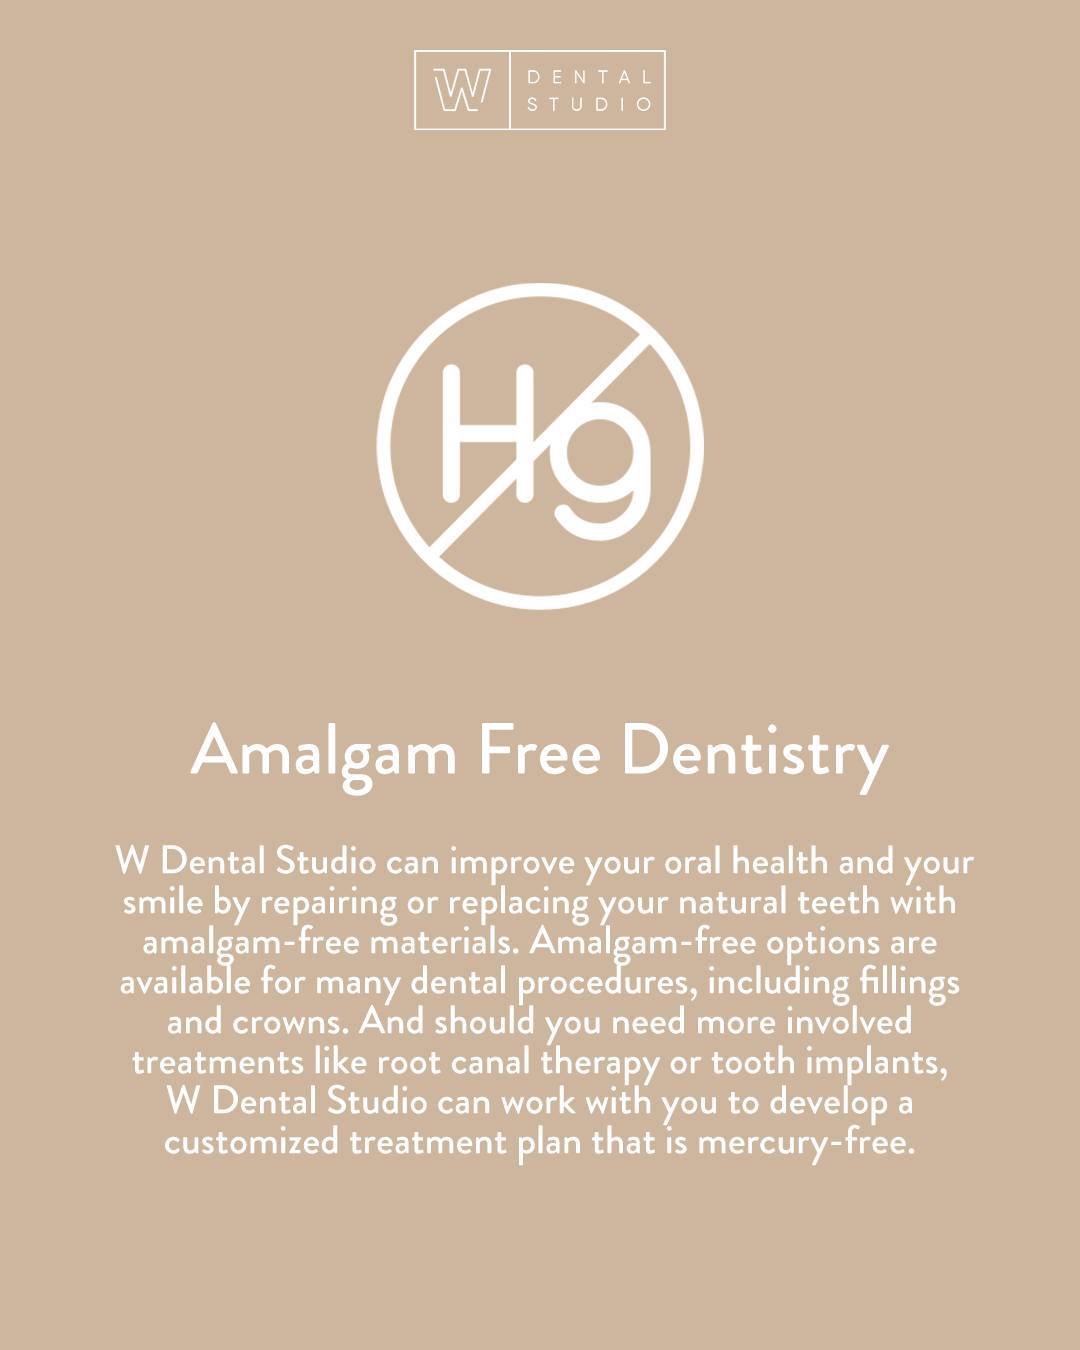 If you’re one of the many patients who prefer mercury-free amalgam fillings, you’ll be happy to know that W Dental Studio can accommodate your request. W Dental Studio can improve your oral health and your smile by repairing or replacing your natural teeth with amalgam-free materials. 

Amalgam-free options are available for many dental procedures, including fillings and crowns. And should you need more involved treatments like root canal therapy or tooth implants, W Dental Studio can work with you to develop a customized treatment plan that is mercury-free.

Book an appointment: 

📞 613-564-3300
📍 270 Richmond Rd, Ottawa, ON
💻 https://buff.ly/3hAztsx
📧 info@wdentalstudio.com